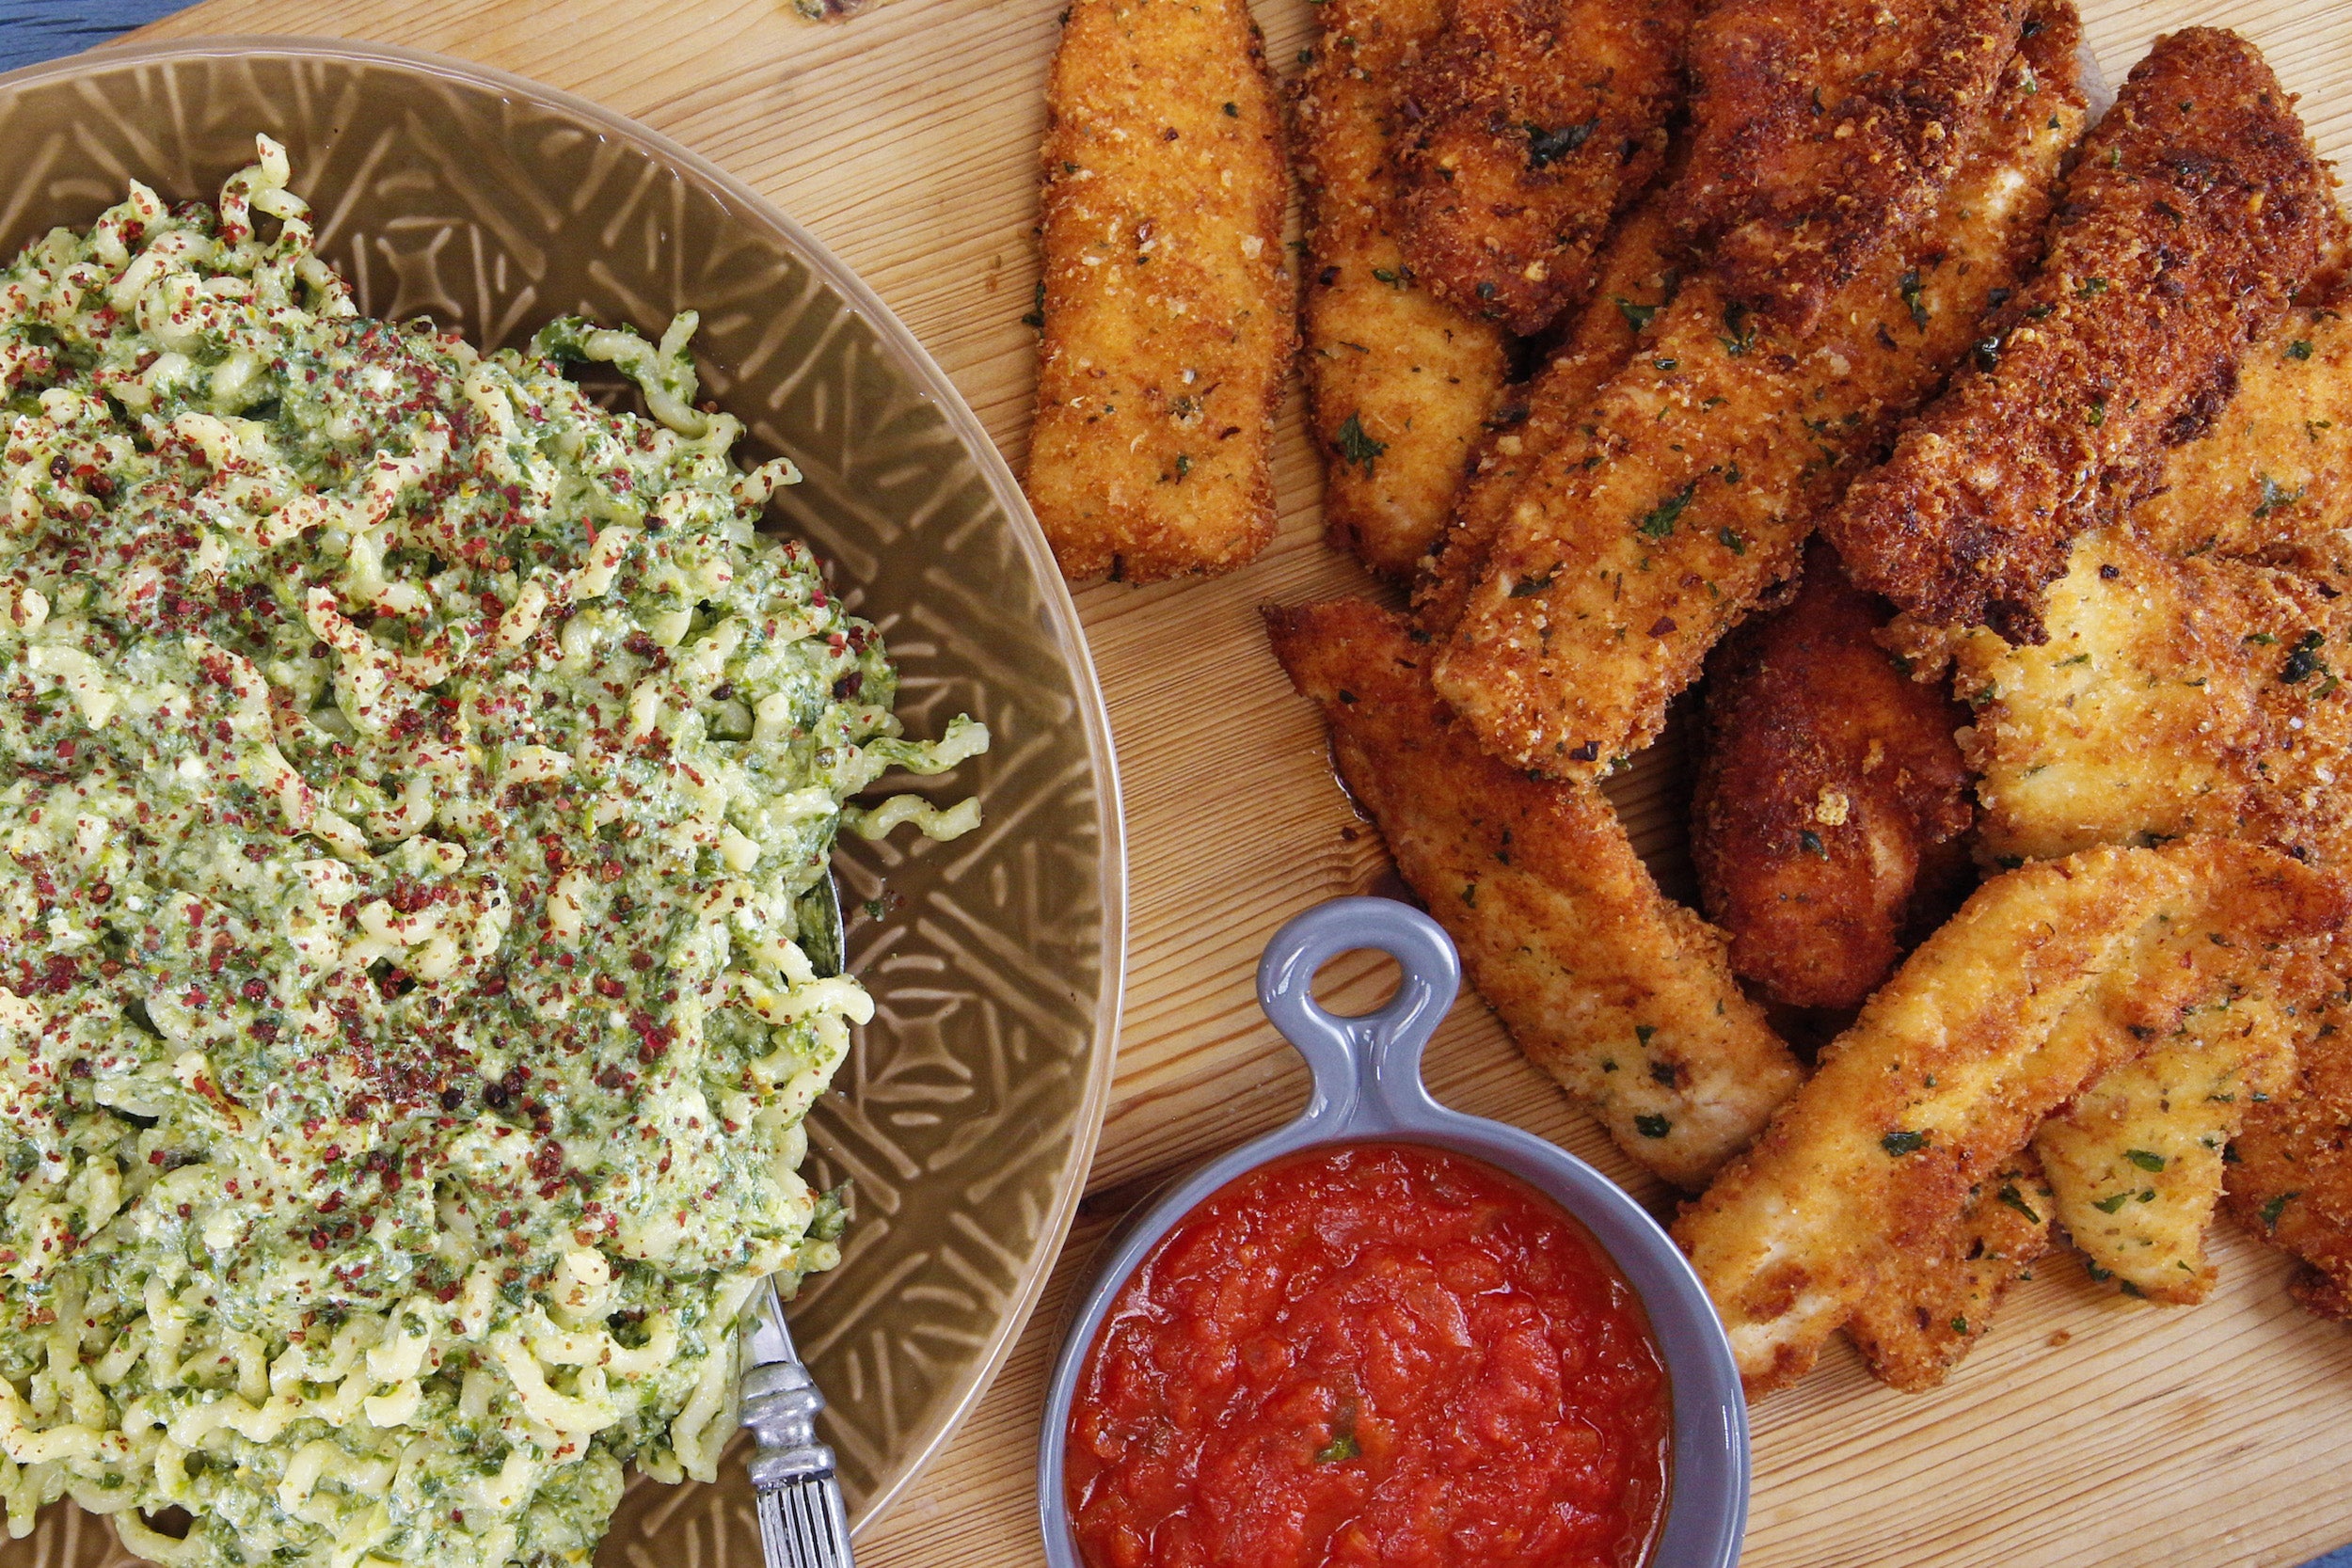 Rachael's Creamy Ramp Pesto Fusilli Lunghi and Chicken Finger Parm with Tomato Basil Dipping Sauce